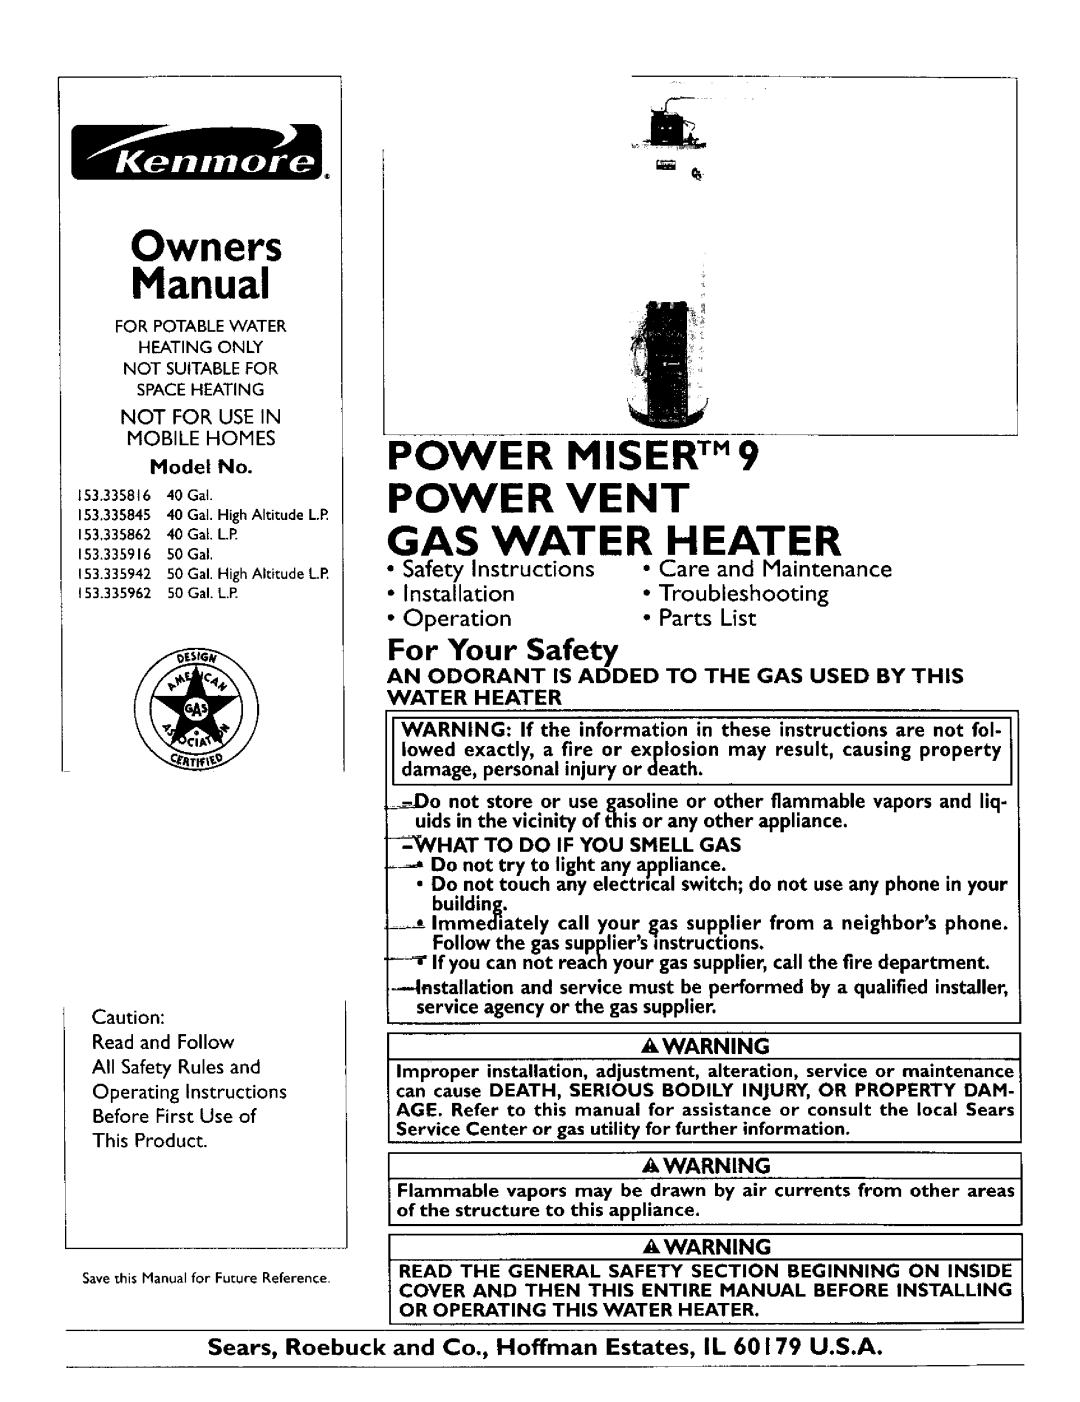 Kenmore 153.335845 owner manual Manual, Power Miser Tm Power Vent Gas Water Heater, For Your Safety, Installation, Owners 